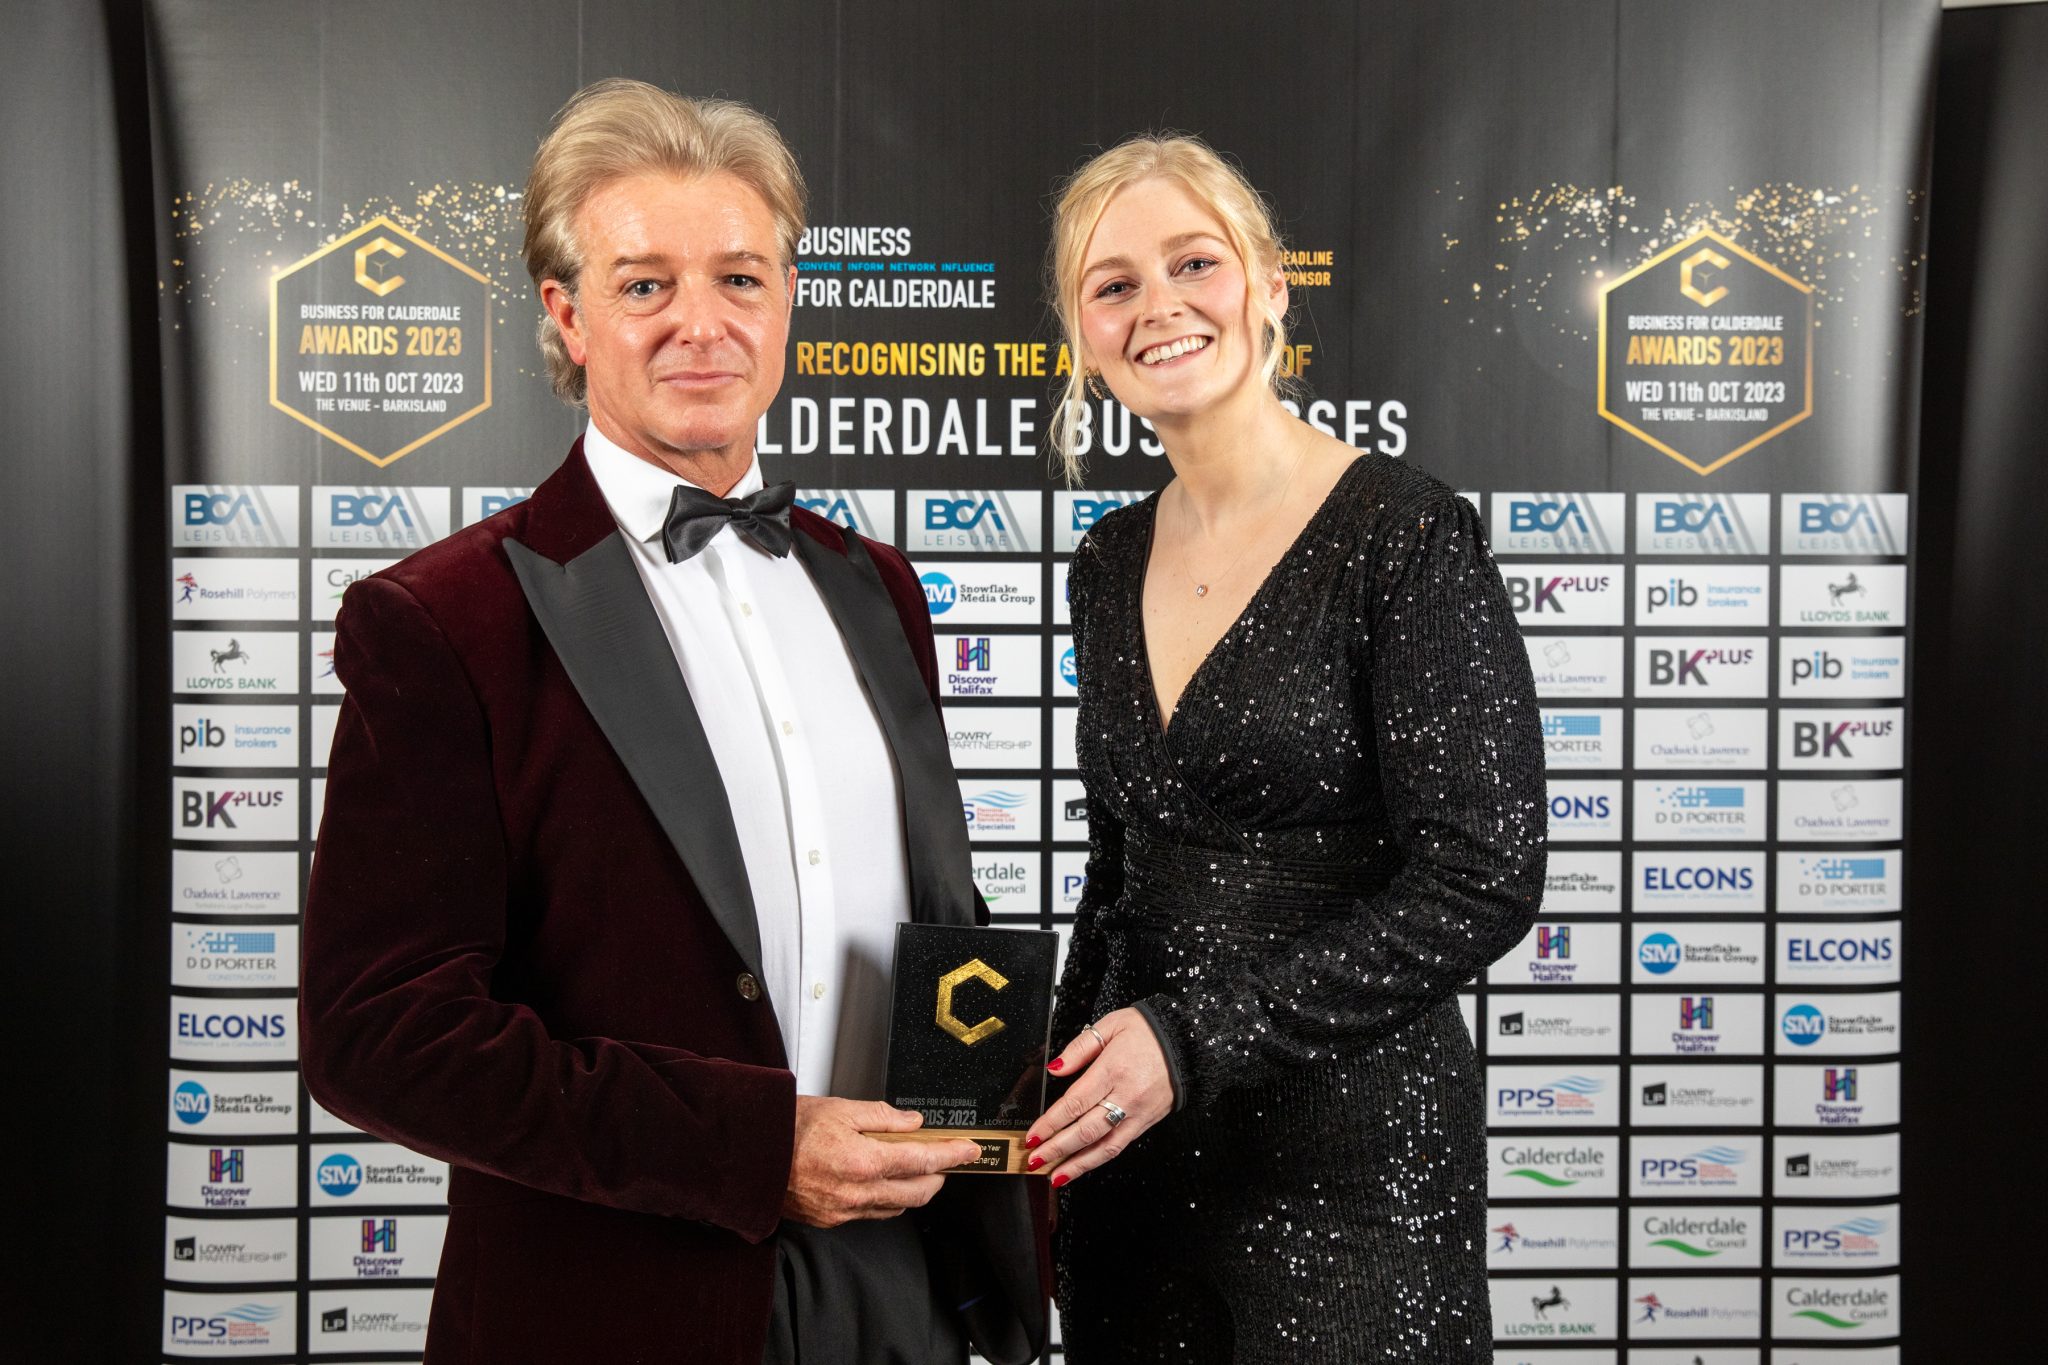 Matthew Crockett with the sponsor of the awards Allie Butterworth From Lloyds banking Group